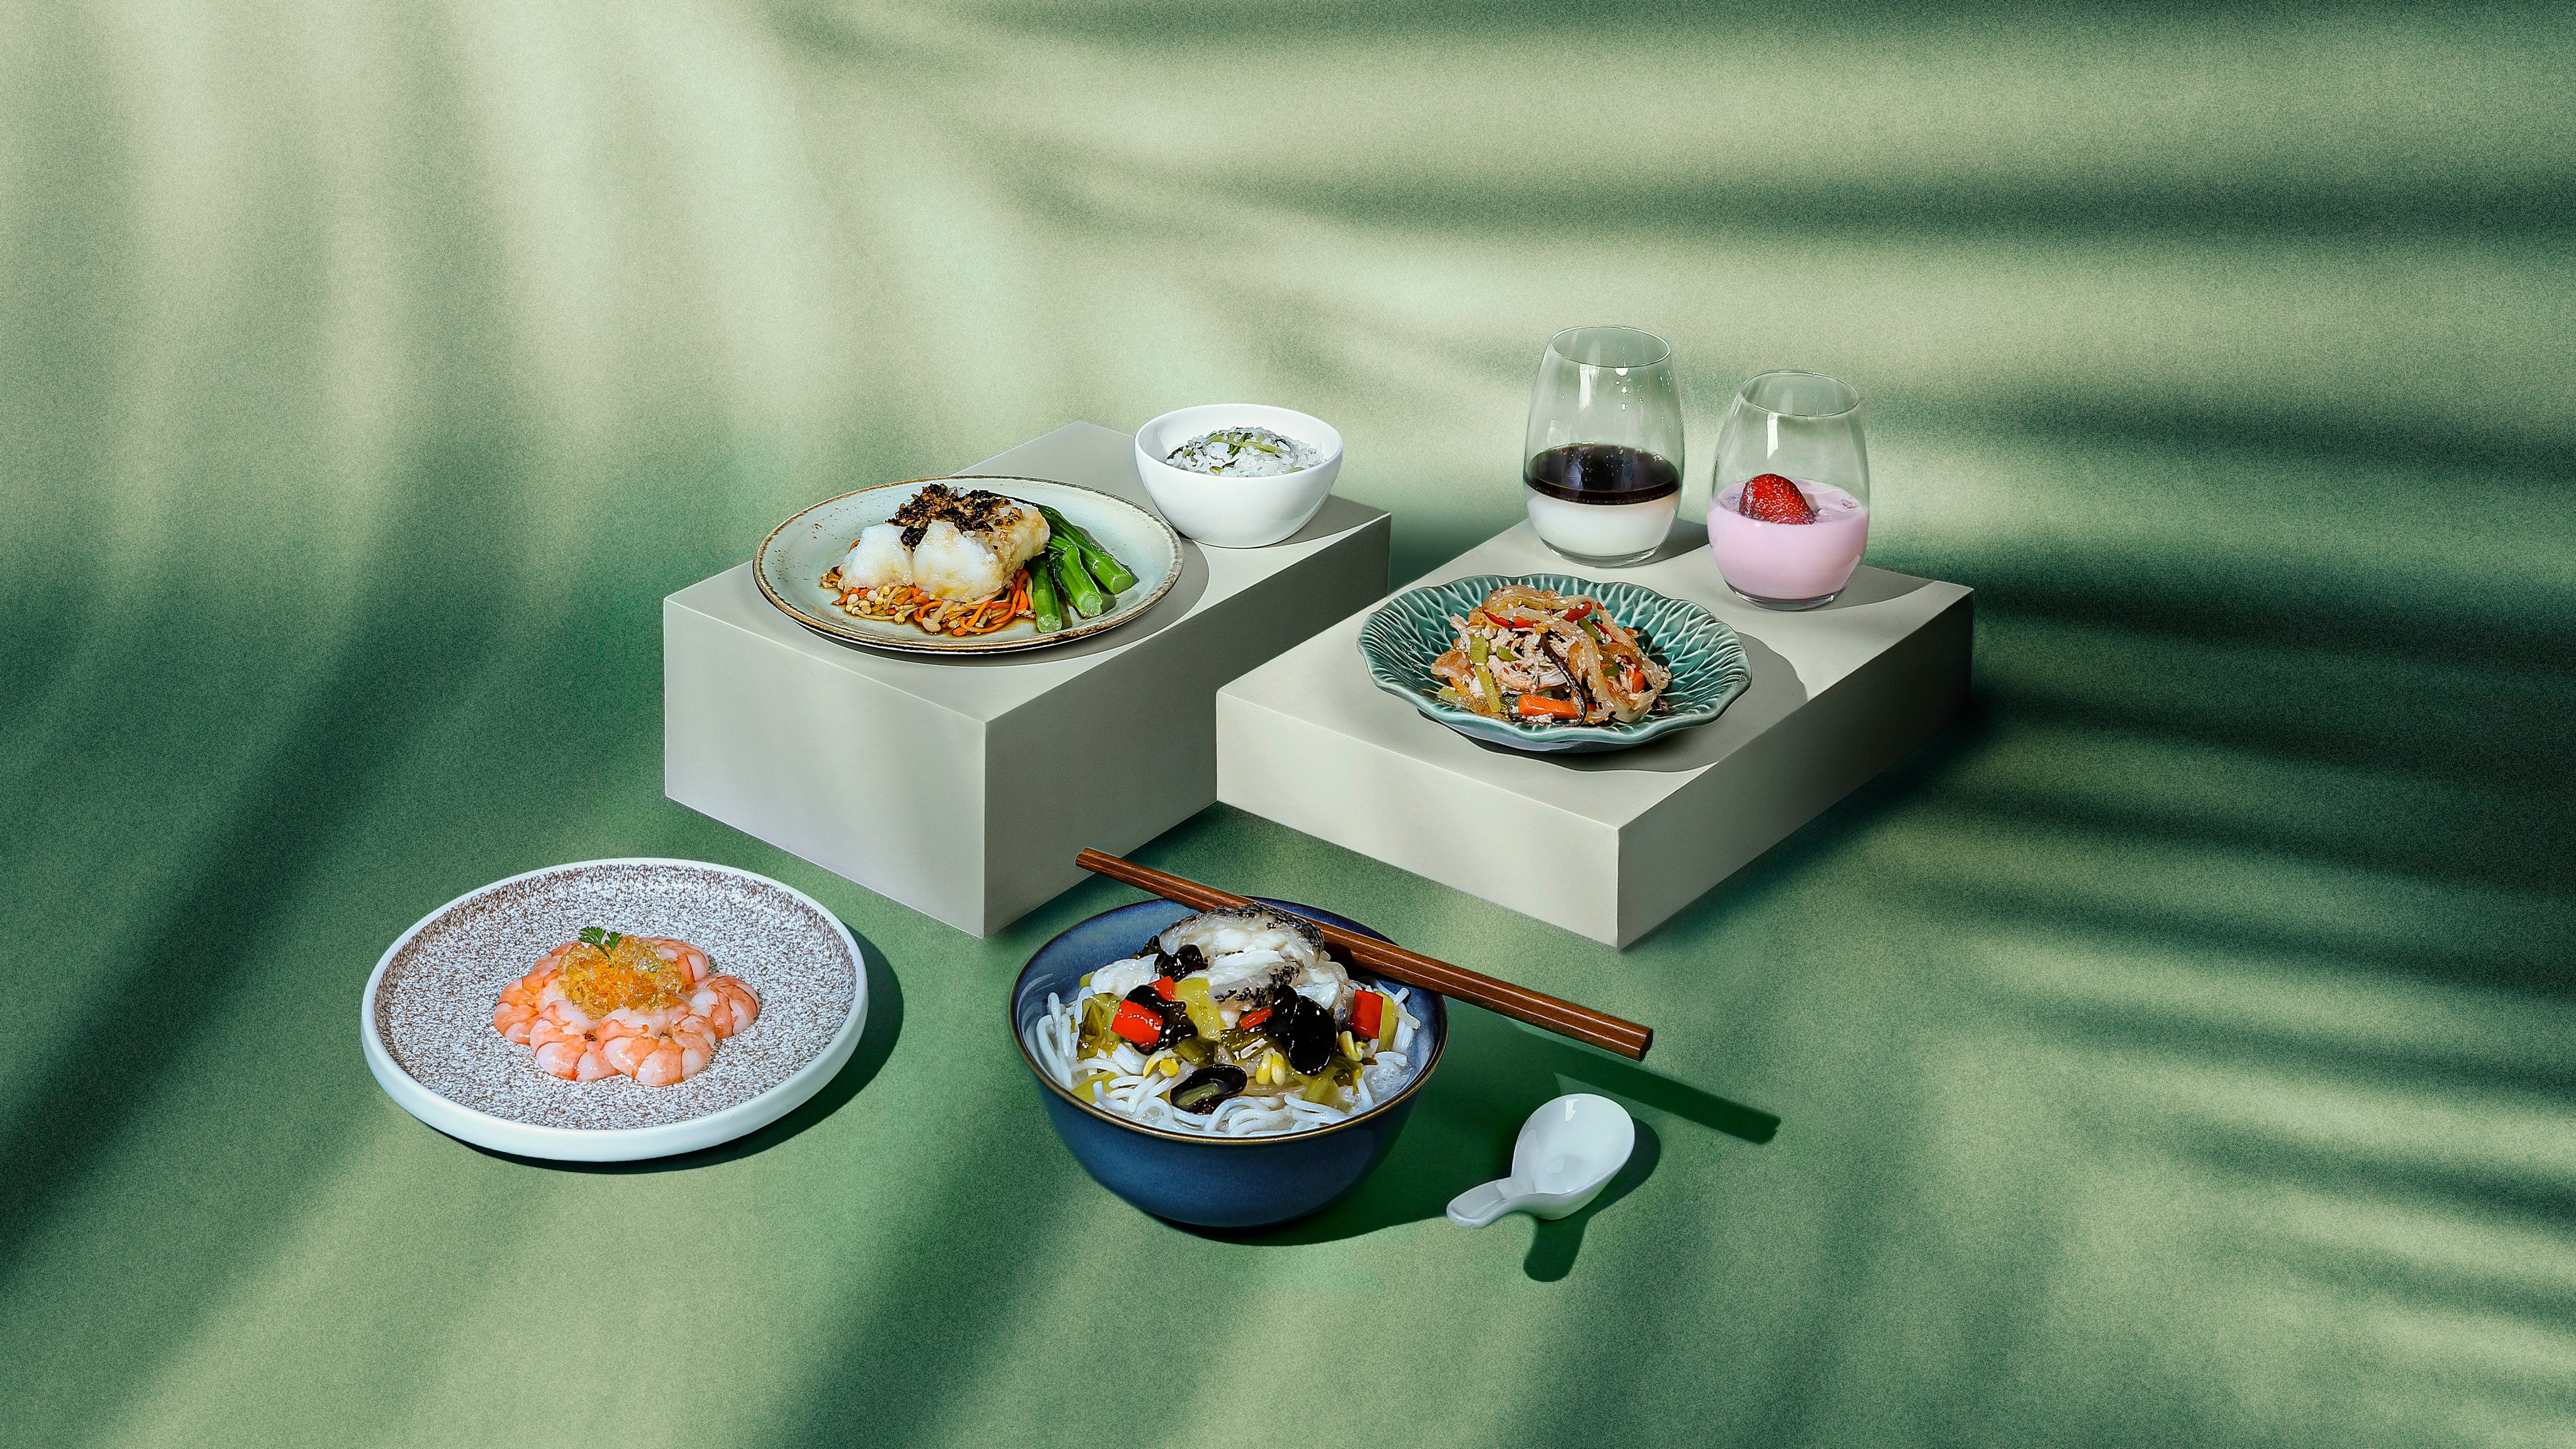 Business-class dishes from Cathay Pacific’s in partnership with Michelin-star restaurant Duddell’s in Hong Kong. Photo: Cathay Pacific